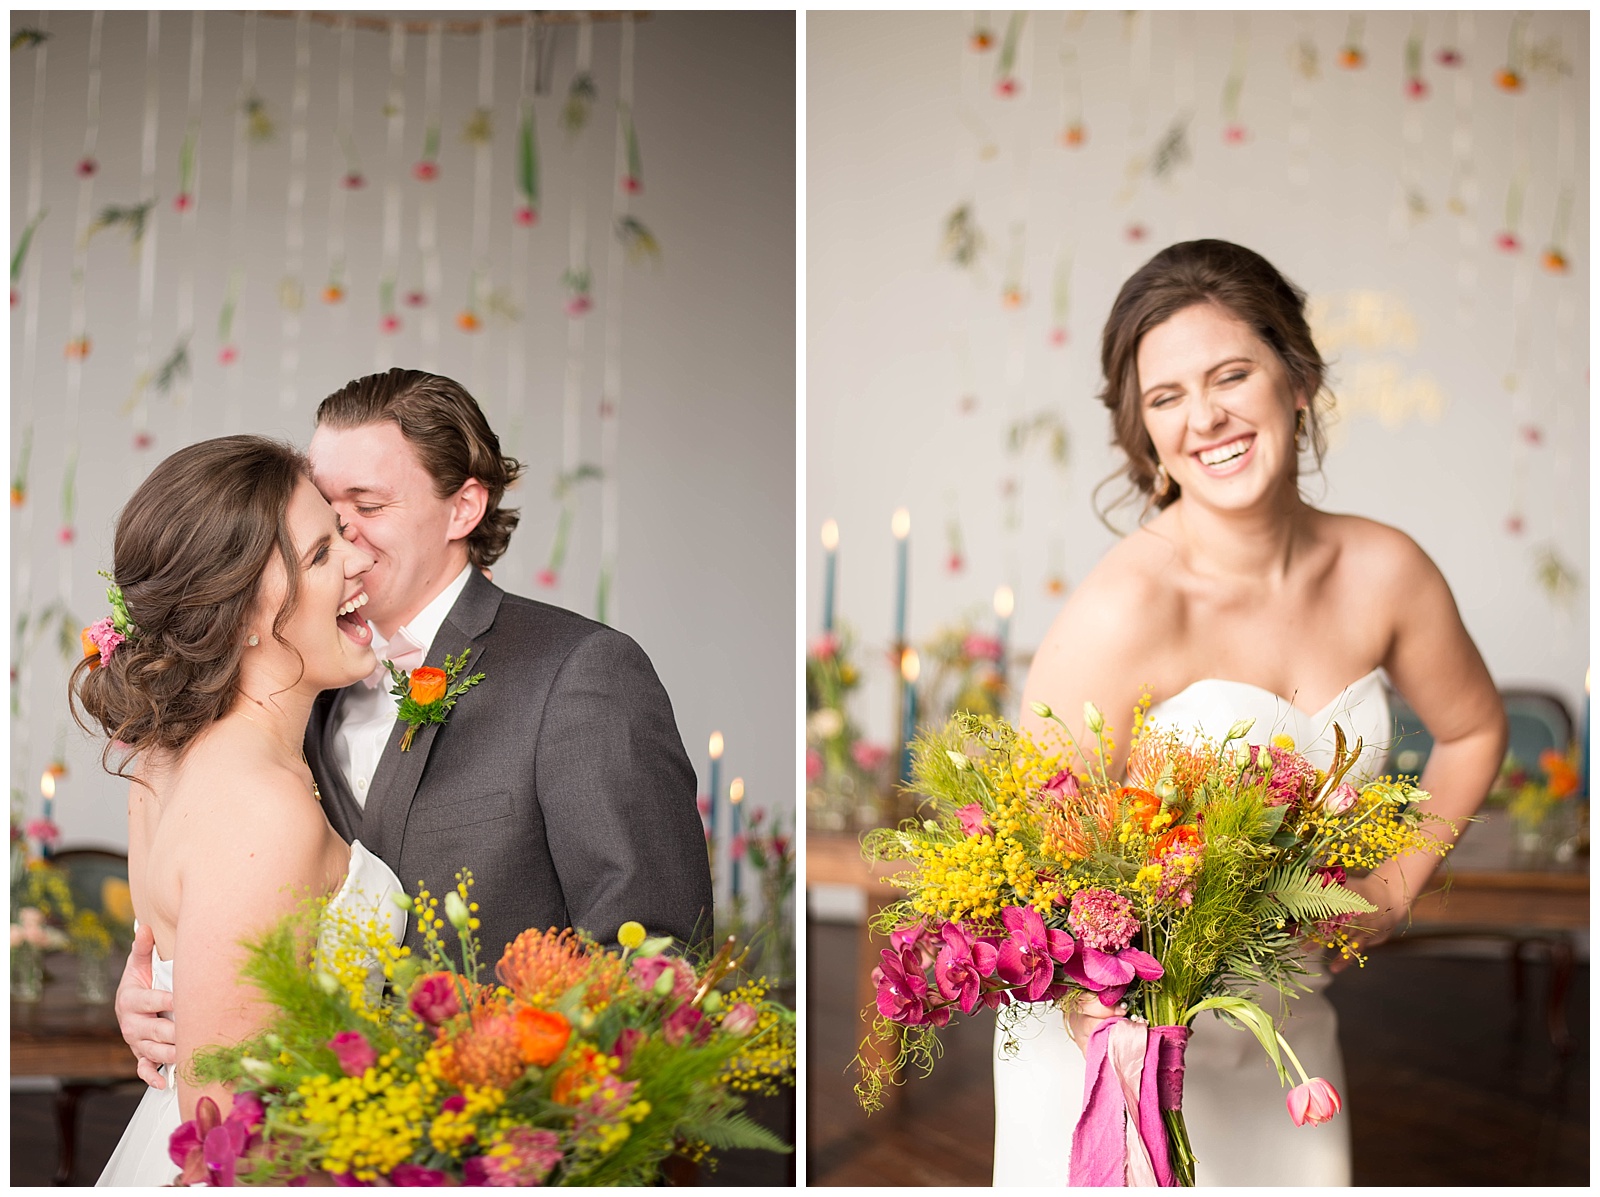 Bride and Groom, Spring Wedding | Monica Brown Photography monicabrownphoto.com